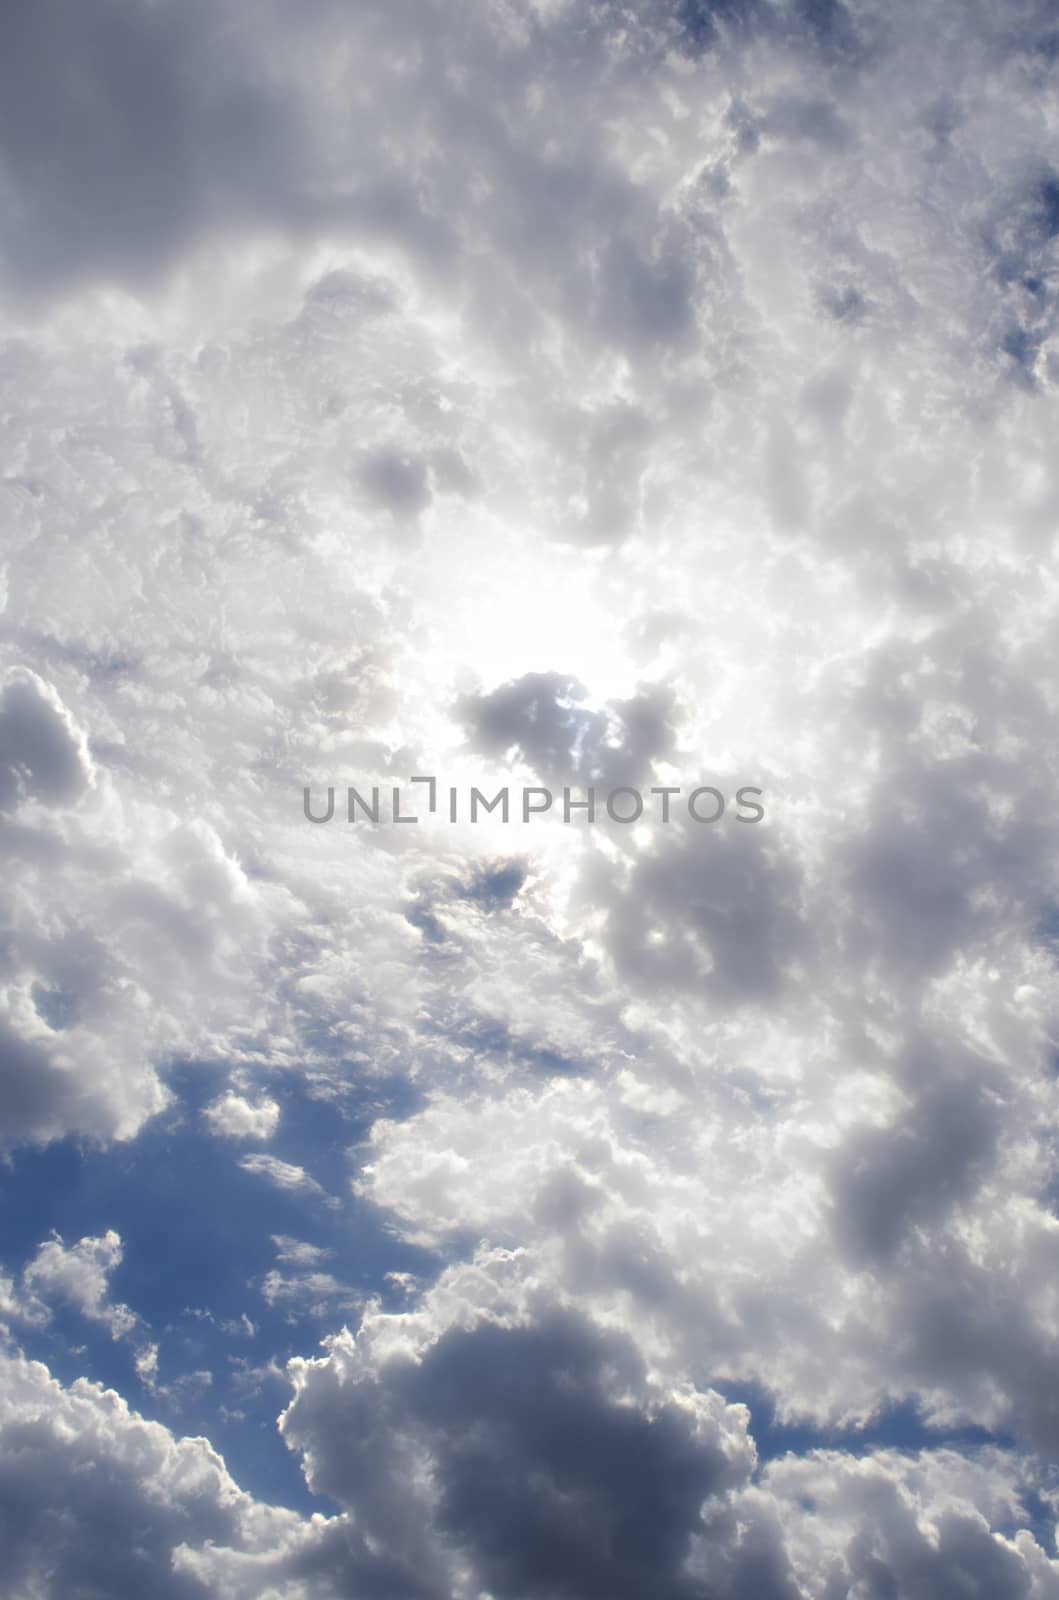 The Fluffy Cloudy Blue Sky Scape 121